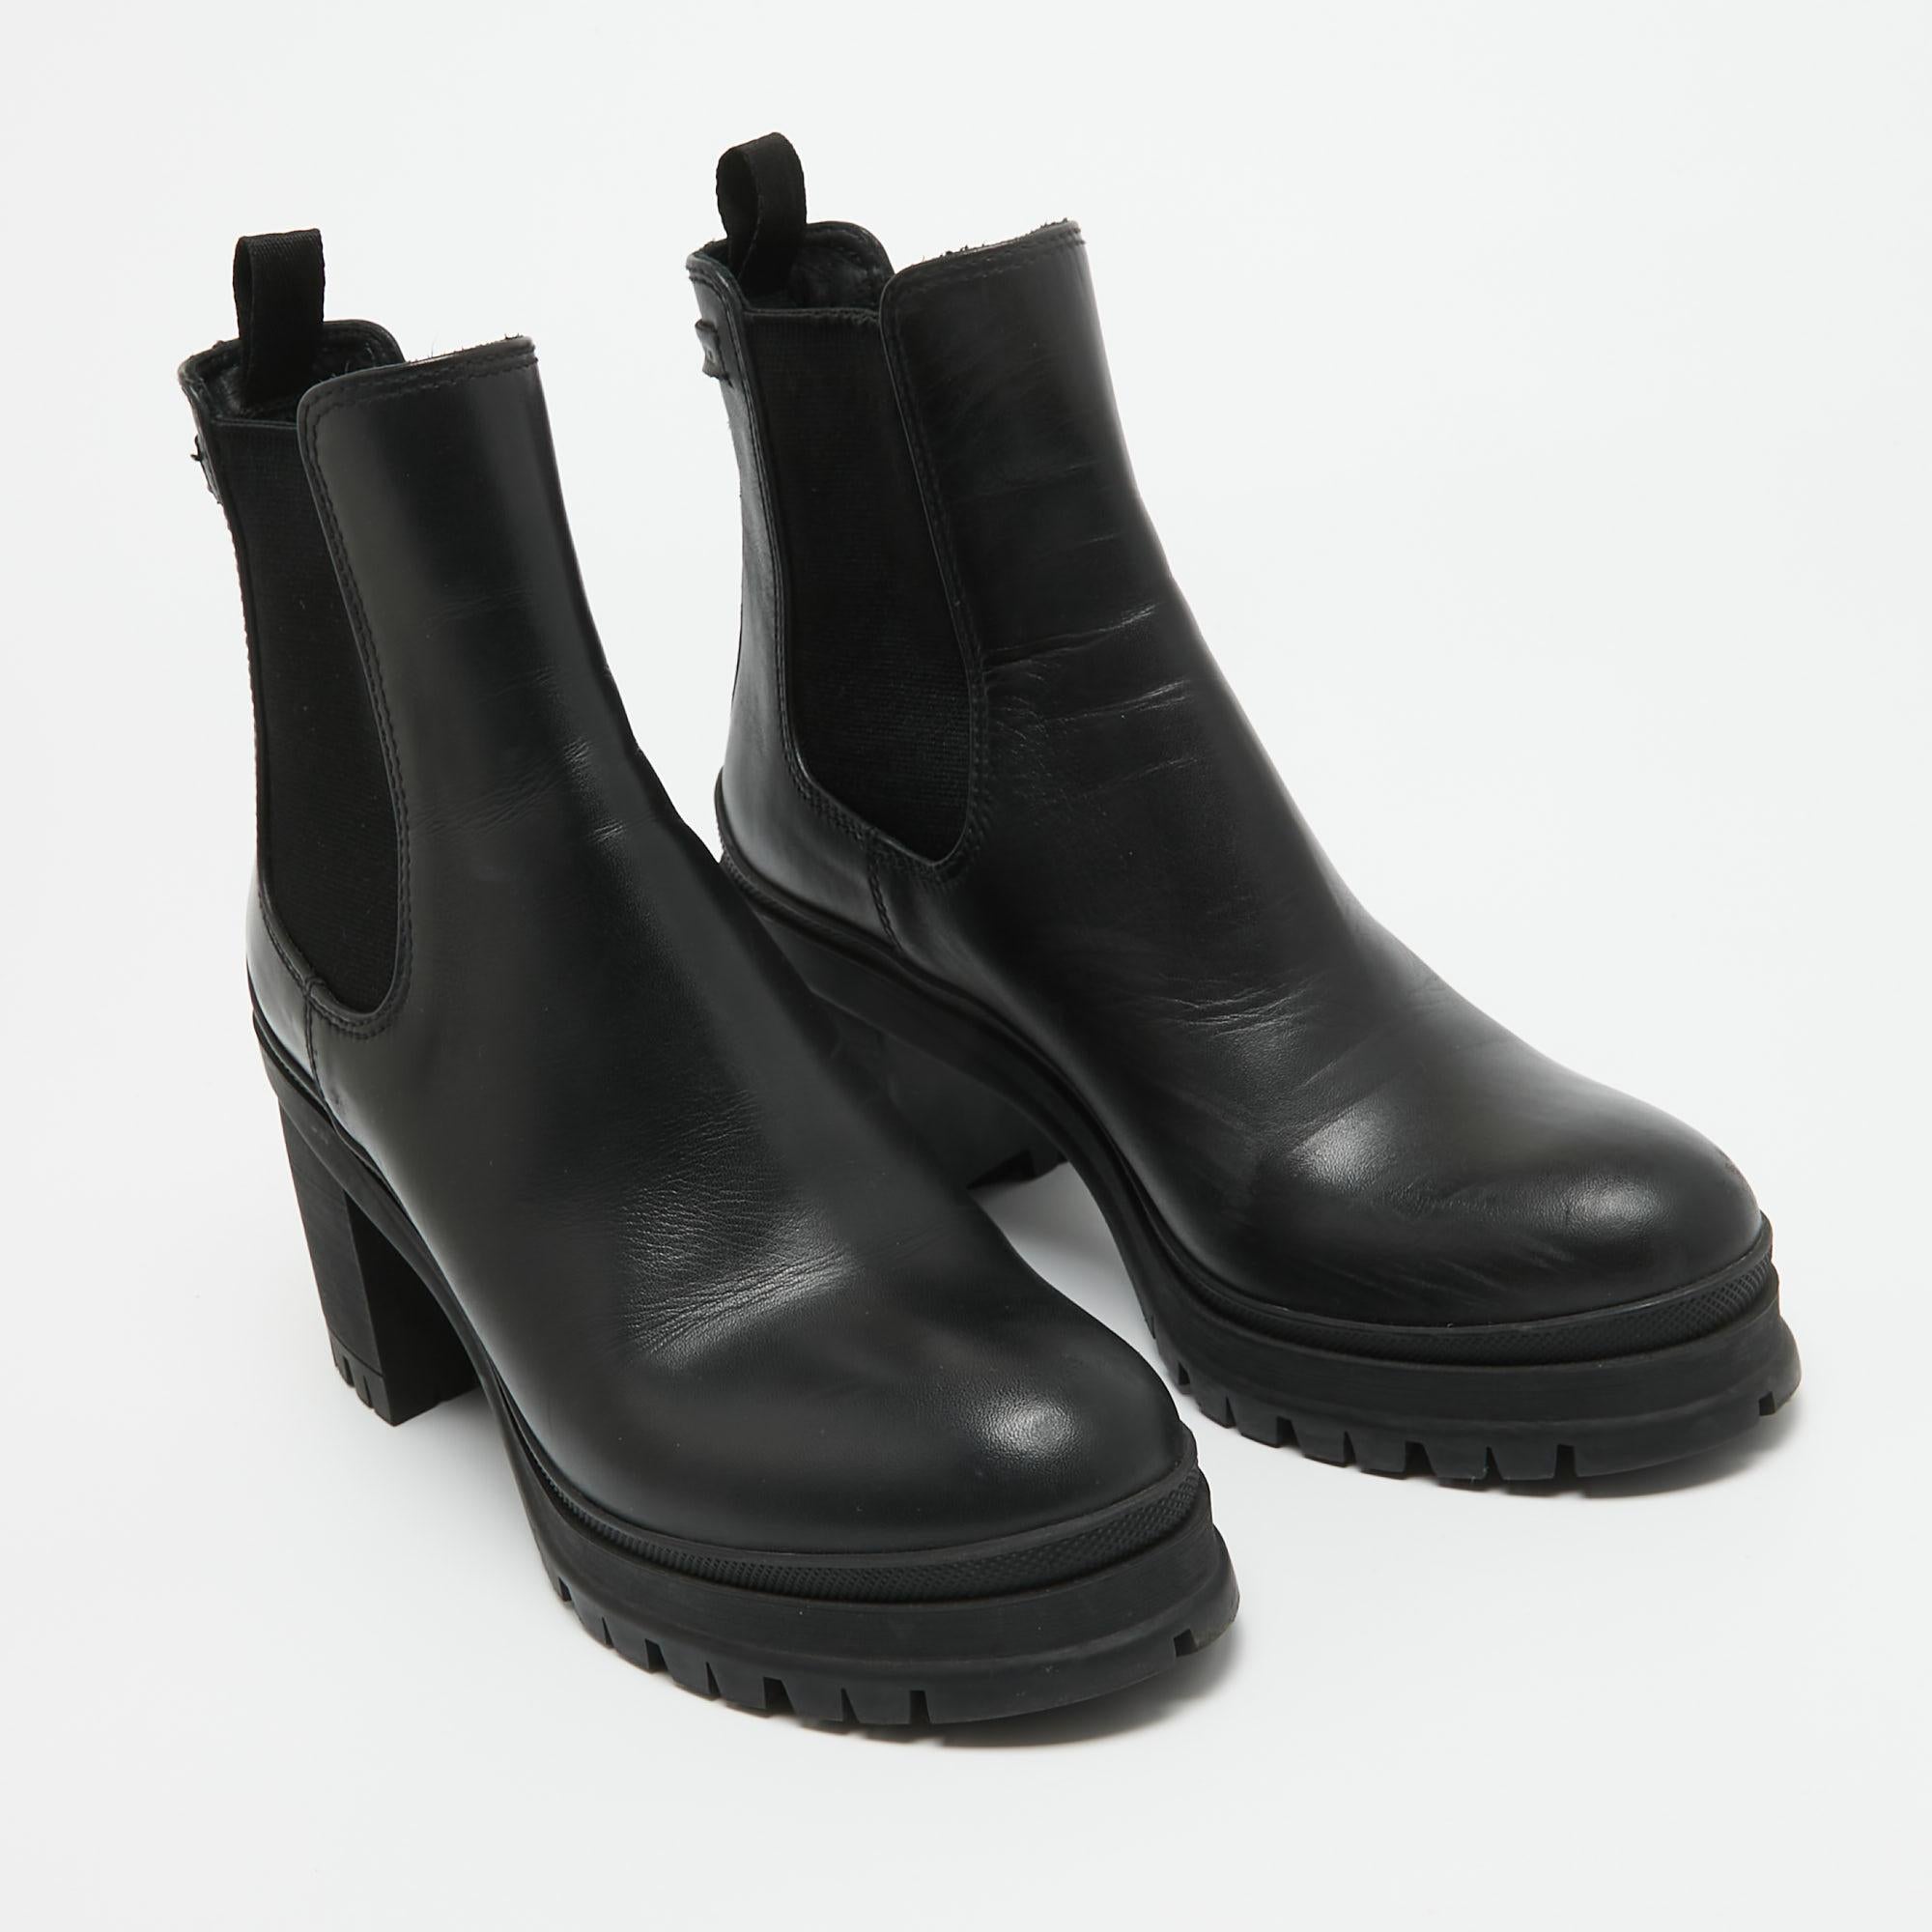 Prada Black Leather Ankle Length Boots Size 38.5 For Sale 1